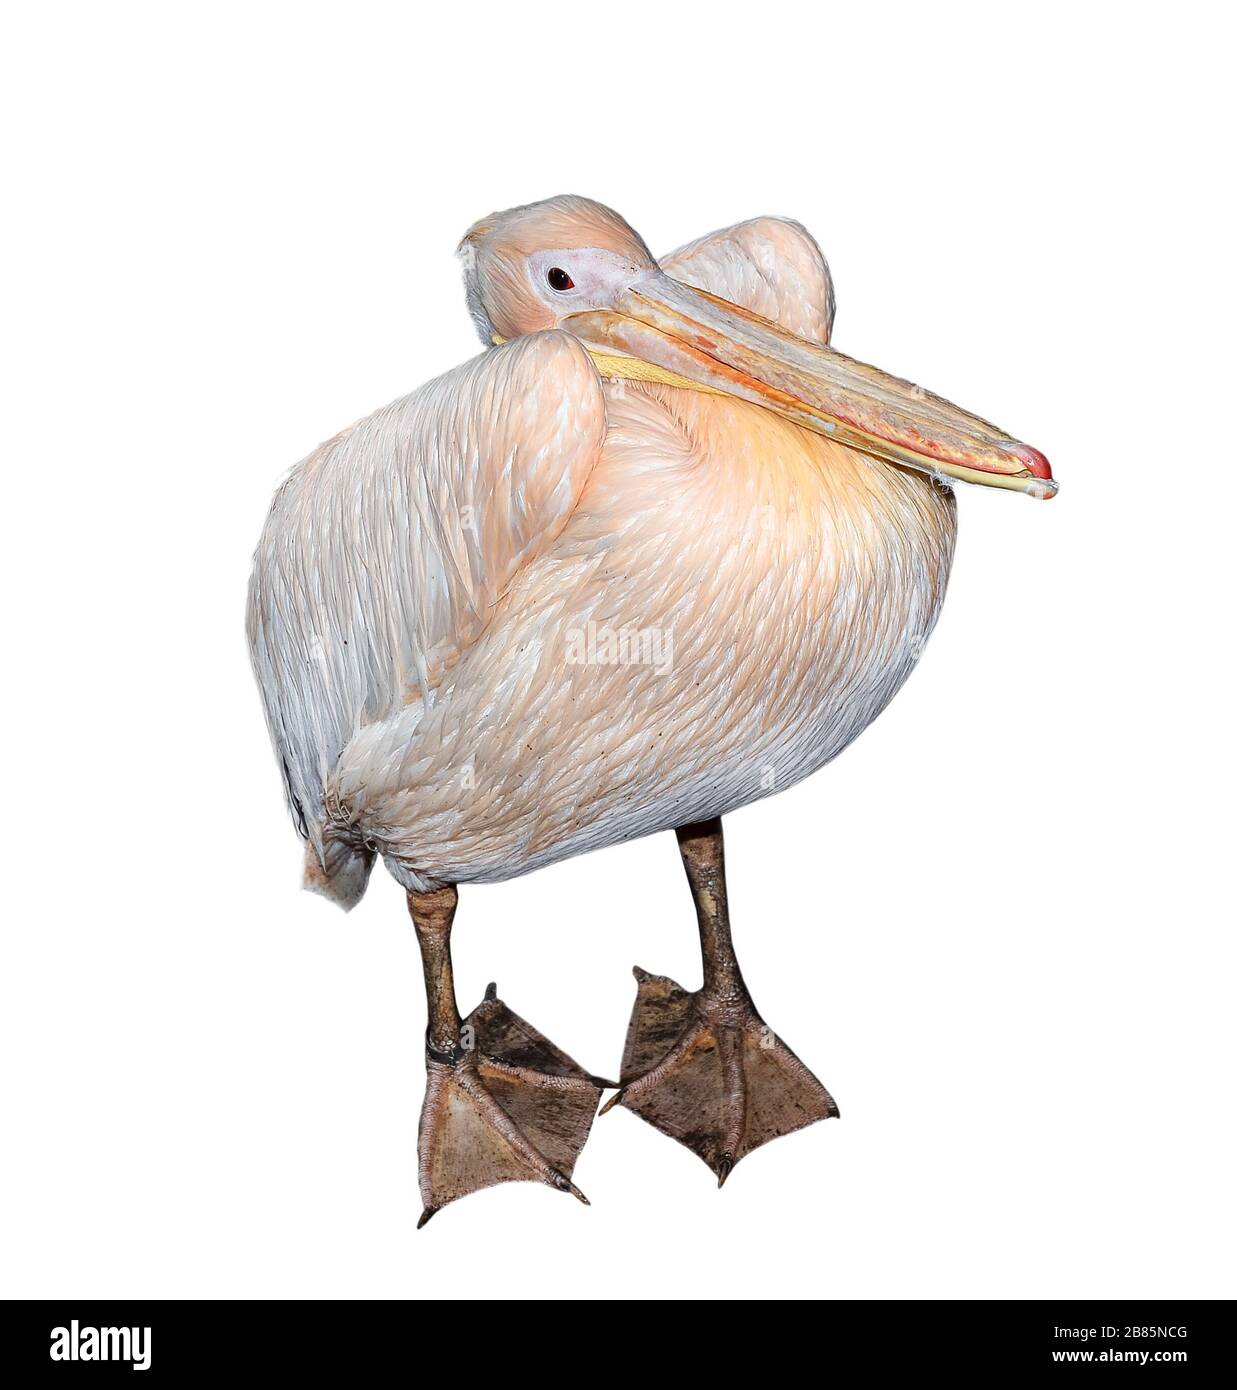 Big beautiful pink pelican isolated on white. Funny cute zoo bird pelican. Pelican - large water bird that eat fish. Stock Photo